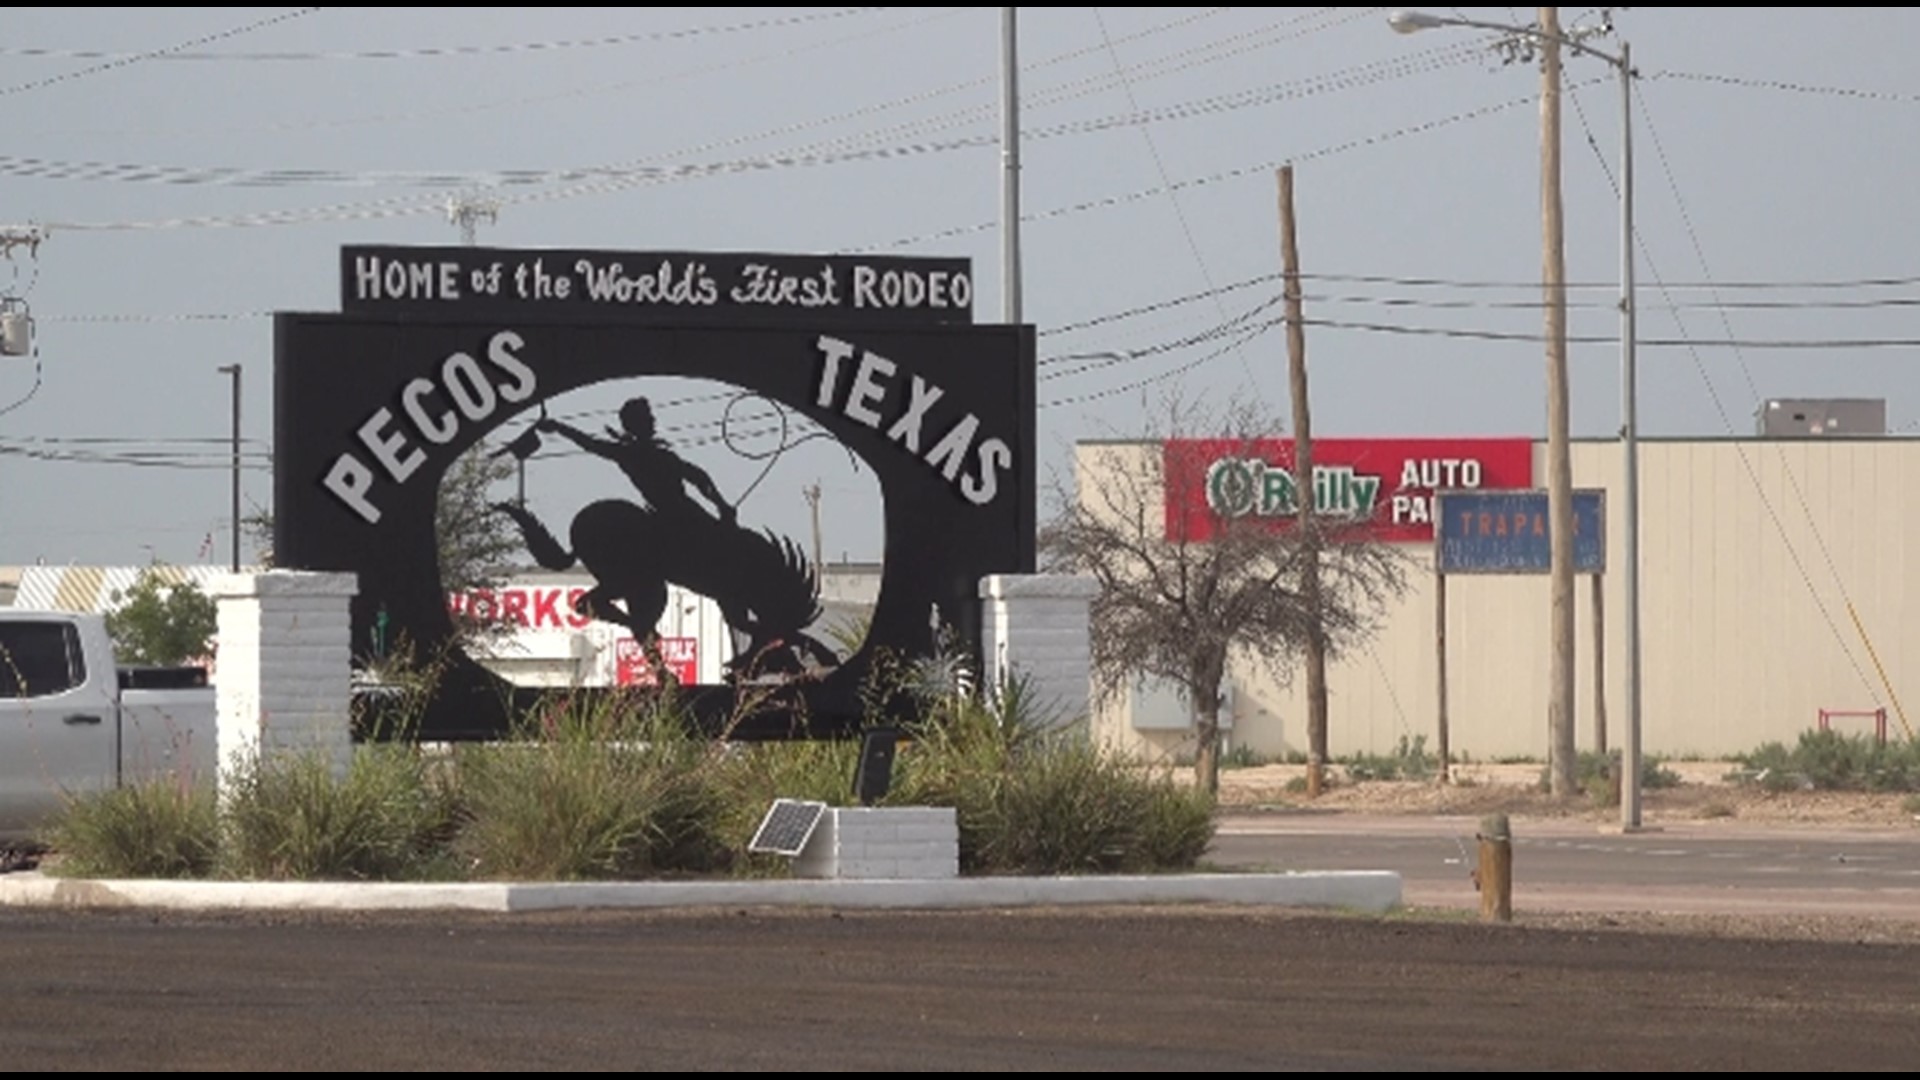 The rodeo has been going on since 1883 and is viewed as a yearly tradition in Pecos.